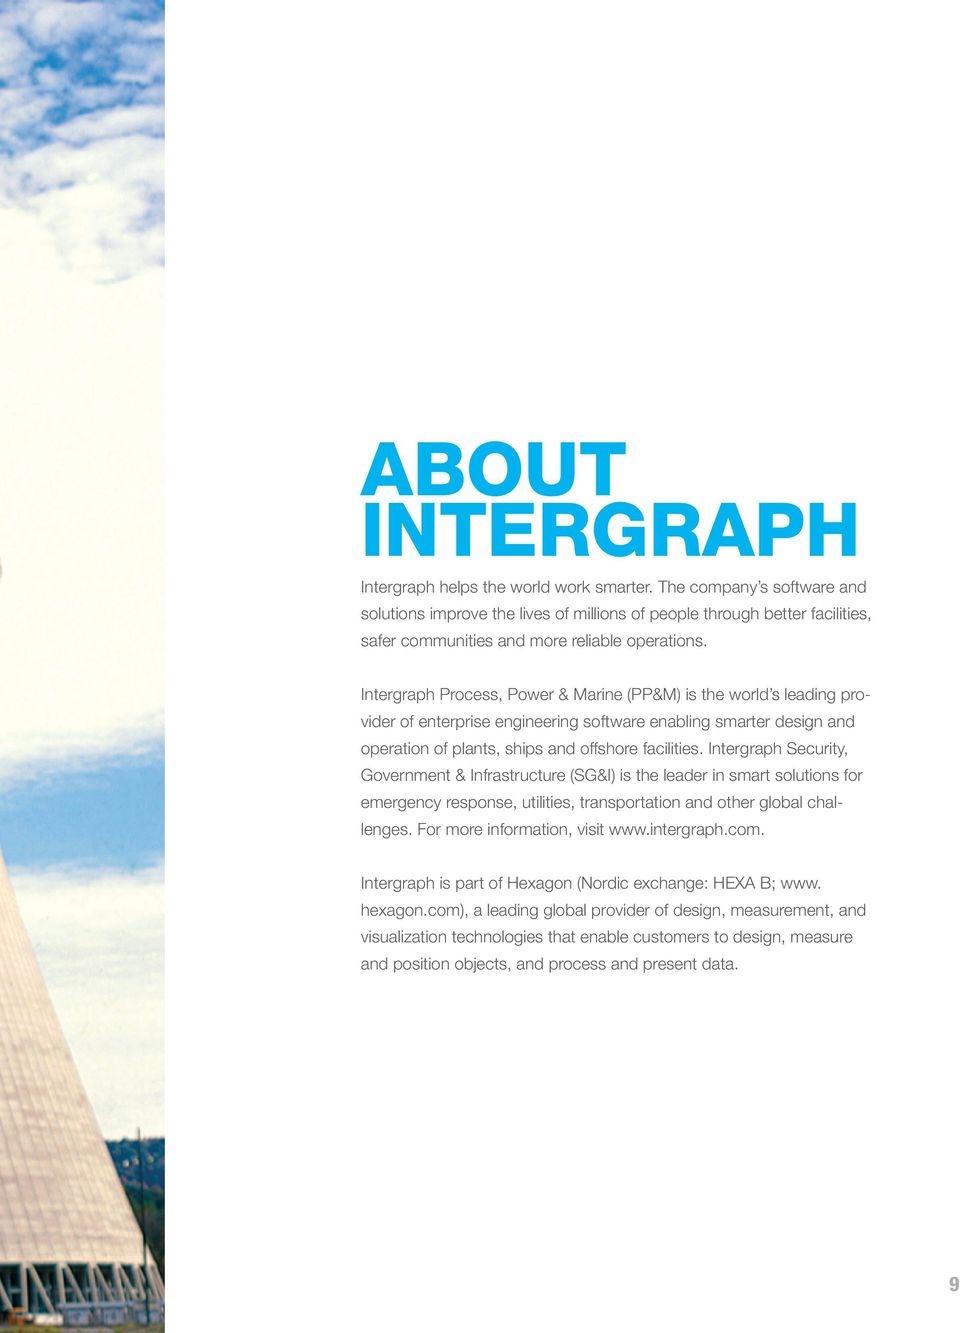 Intergraph Process, Power & Marine (PP&M) is the world s leading provider of enterprise engineering software enabling smarter design and operation of plants, ships and offshore facilities.